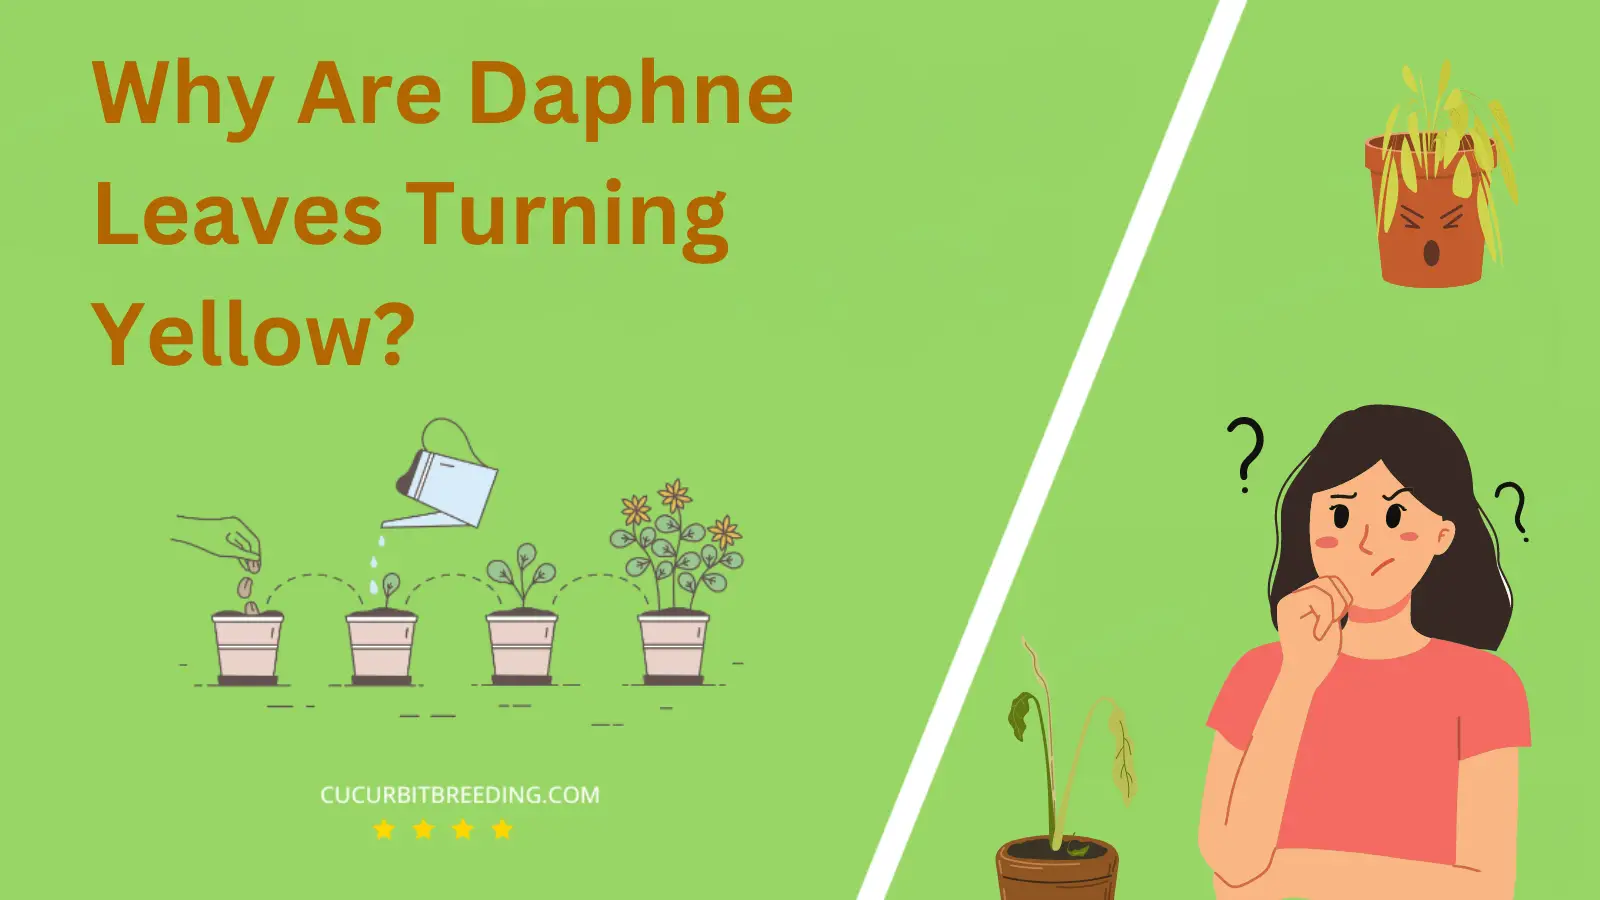 Why Are Daphne Leaves Turning Yellow